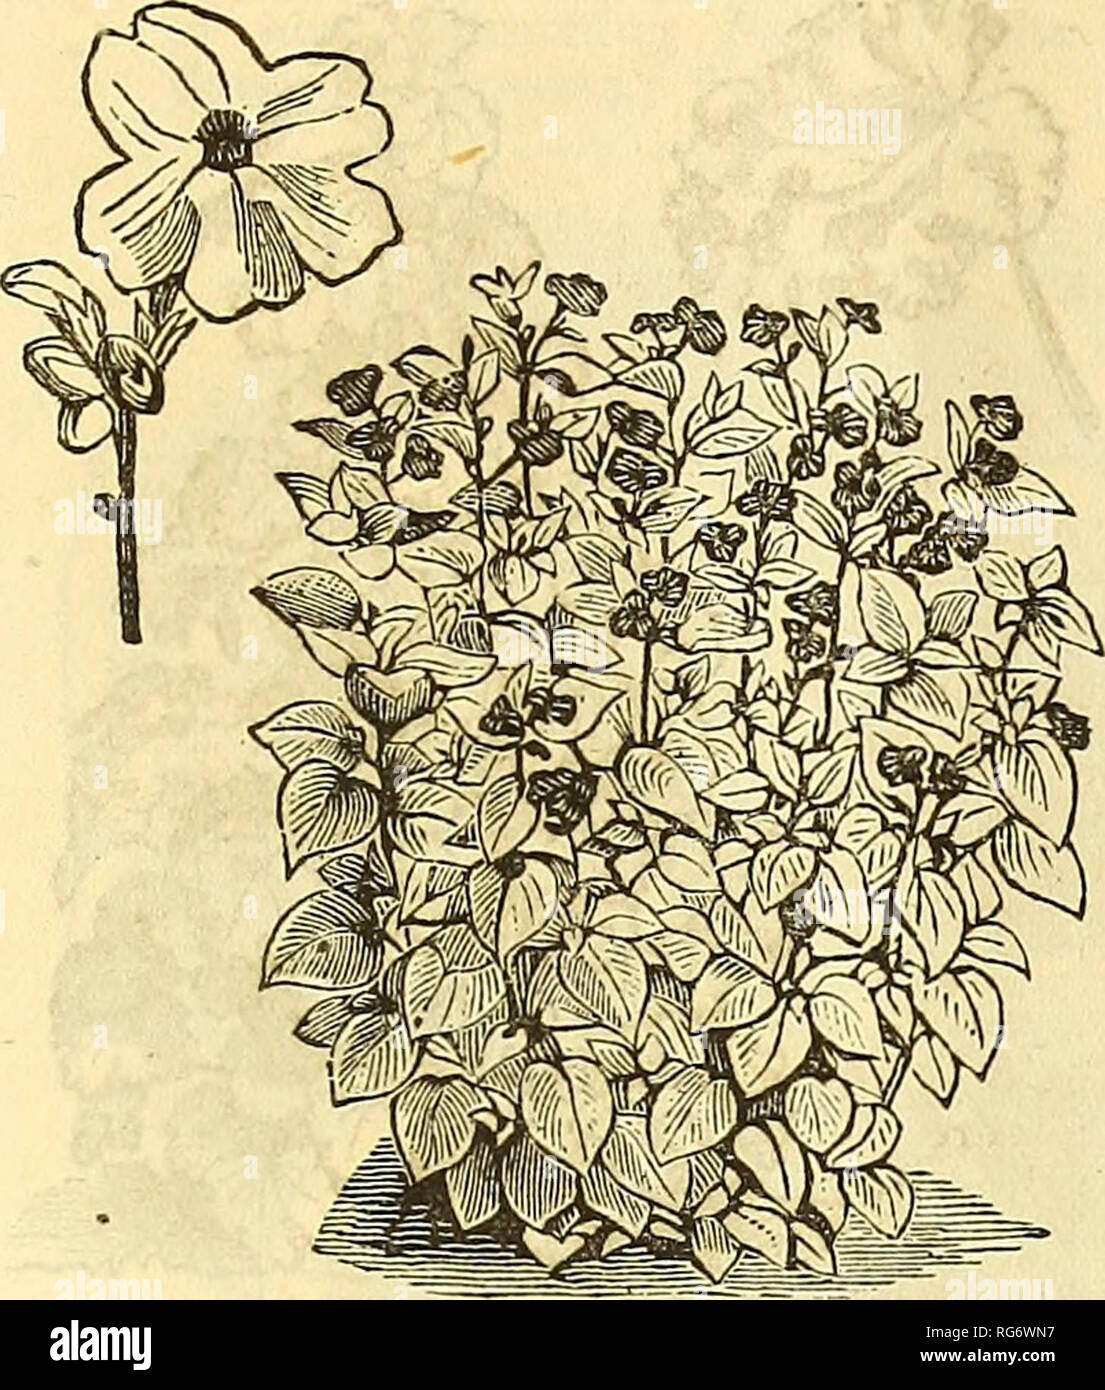 . Burpee's farm annual : garden, farm, and flower seeds, blooded stock. Nursery stock Pennsylvania Philadelphia Catalogs; Flowers Catalogs; Vegetables Catalogs; Seeds Catalogs. No. 63.—Candytuft—New Hybrid Dwarf.. No. 50.—Browallia Cerviakowski. 82. Ciementei. New and improved Dusty Miller, pro- ducing crowns of silvery leaves, deeply fringed. CHRYSANTHEMUM. The following annual varieties are exceedingly pretty. Of easy and rapid growth, they are bright, cheerful, and free bloomers. 83. Coronarium. Double, mixed ; 13^ feet. 84. Tricolor, Burridge's Improved. Flowers crimson, with white center; Stock Photo